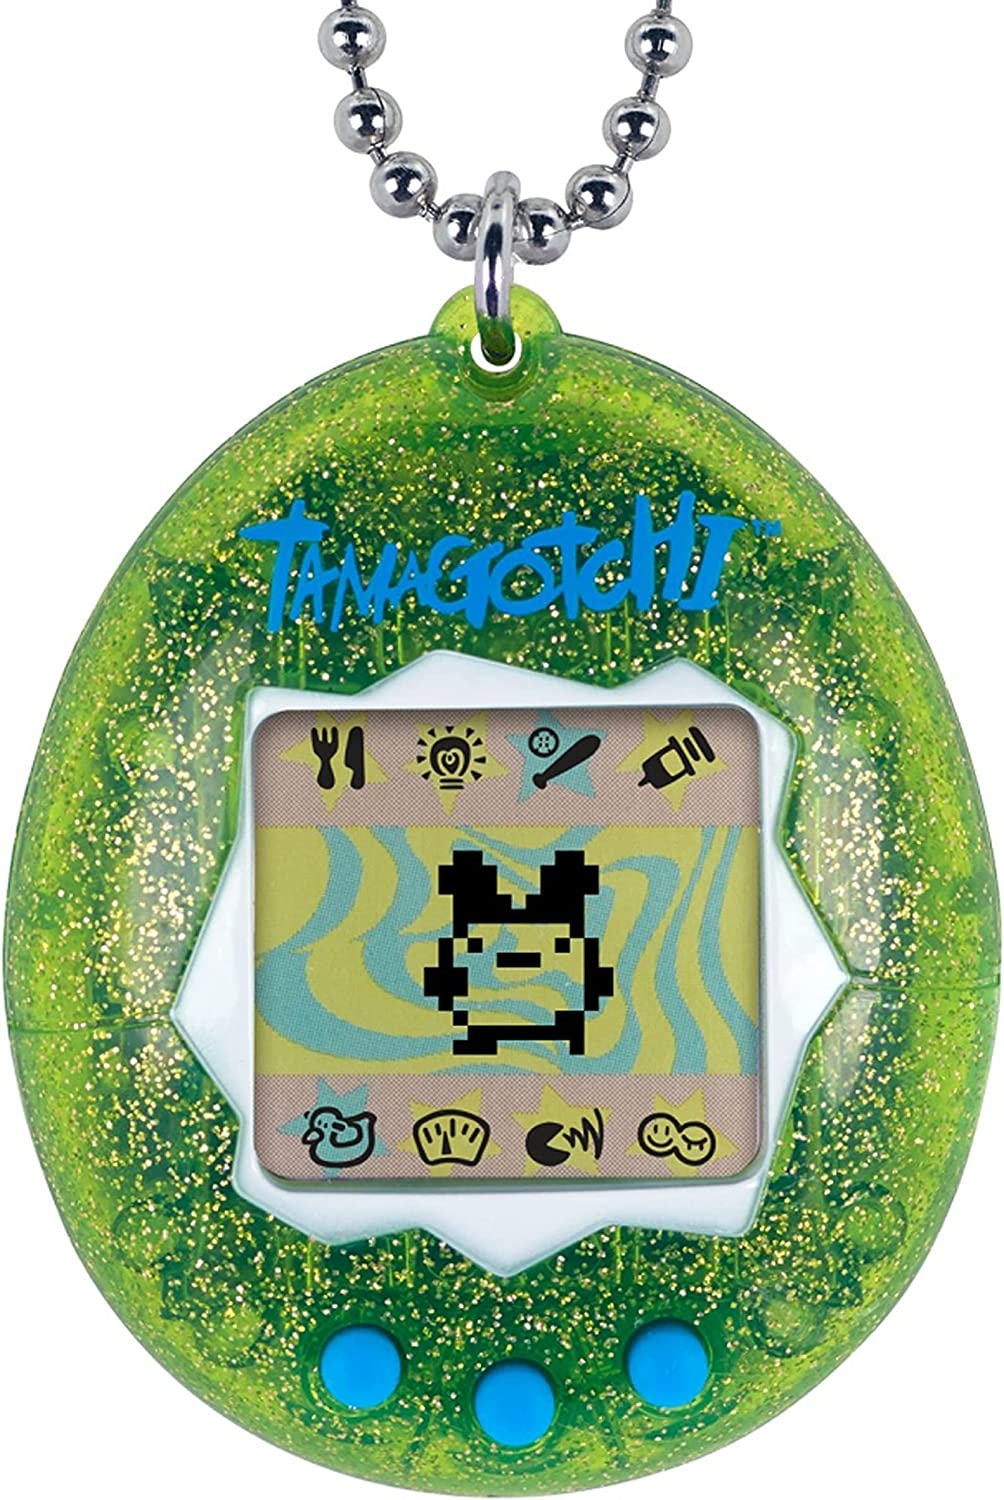 Tamagotchi Electronic Game, Green Glitter Import To Shop ×Product customization General Description Gallery Reviews Variations